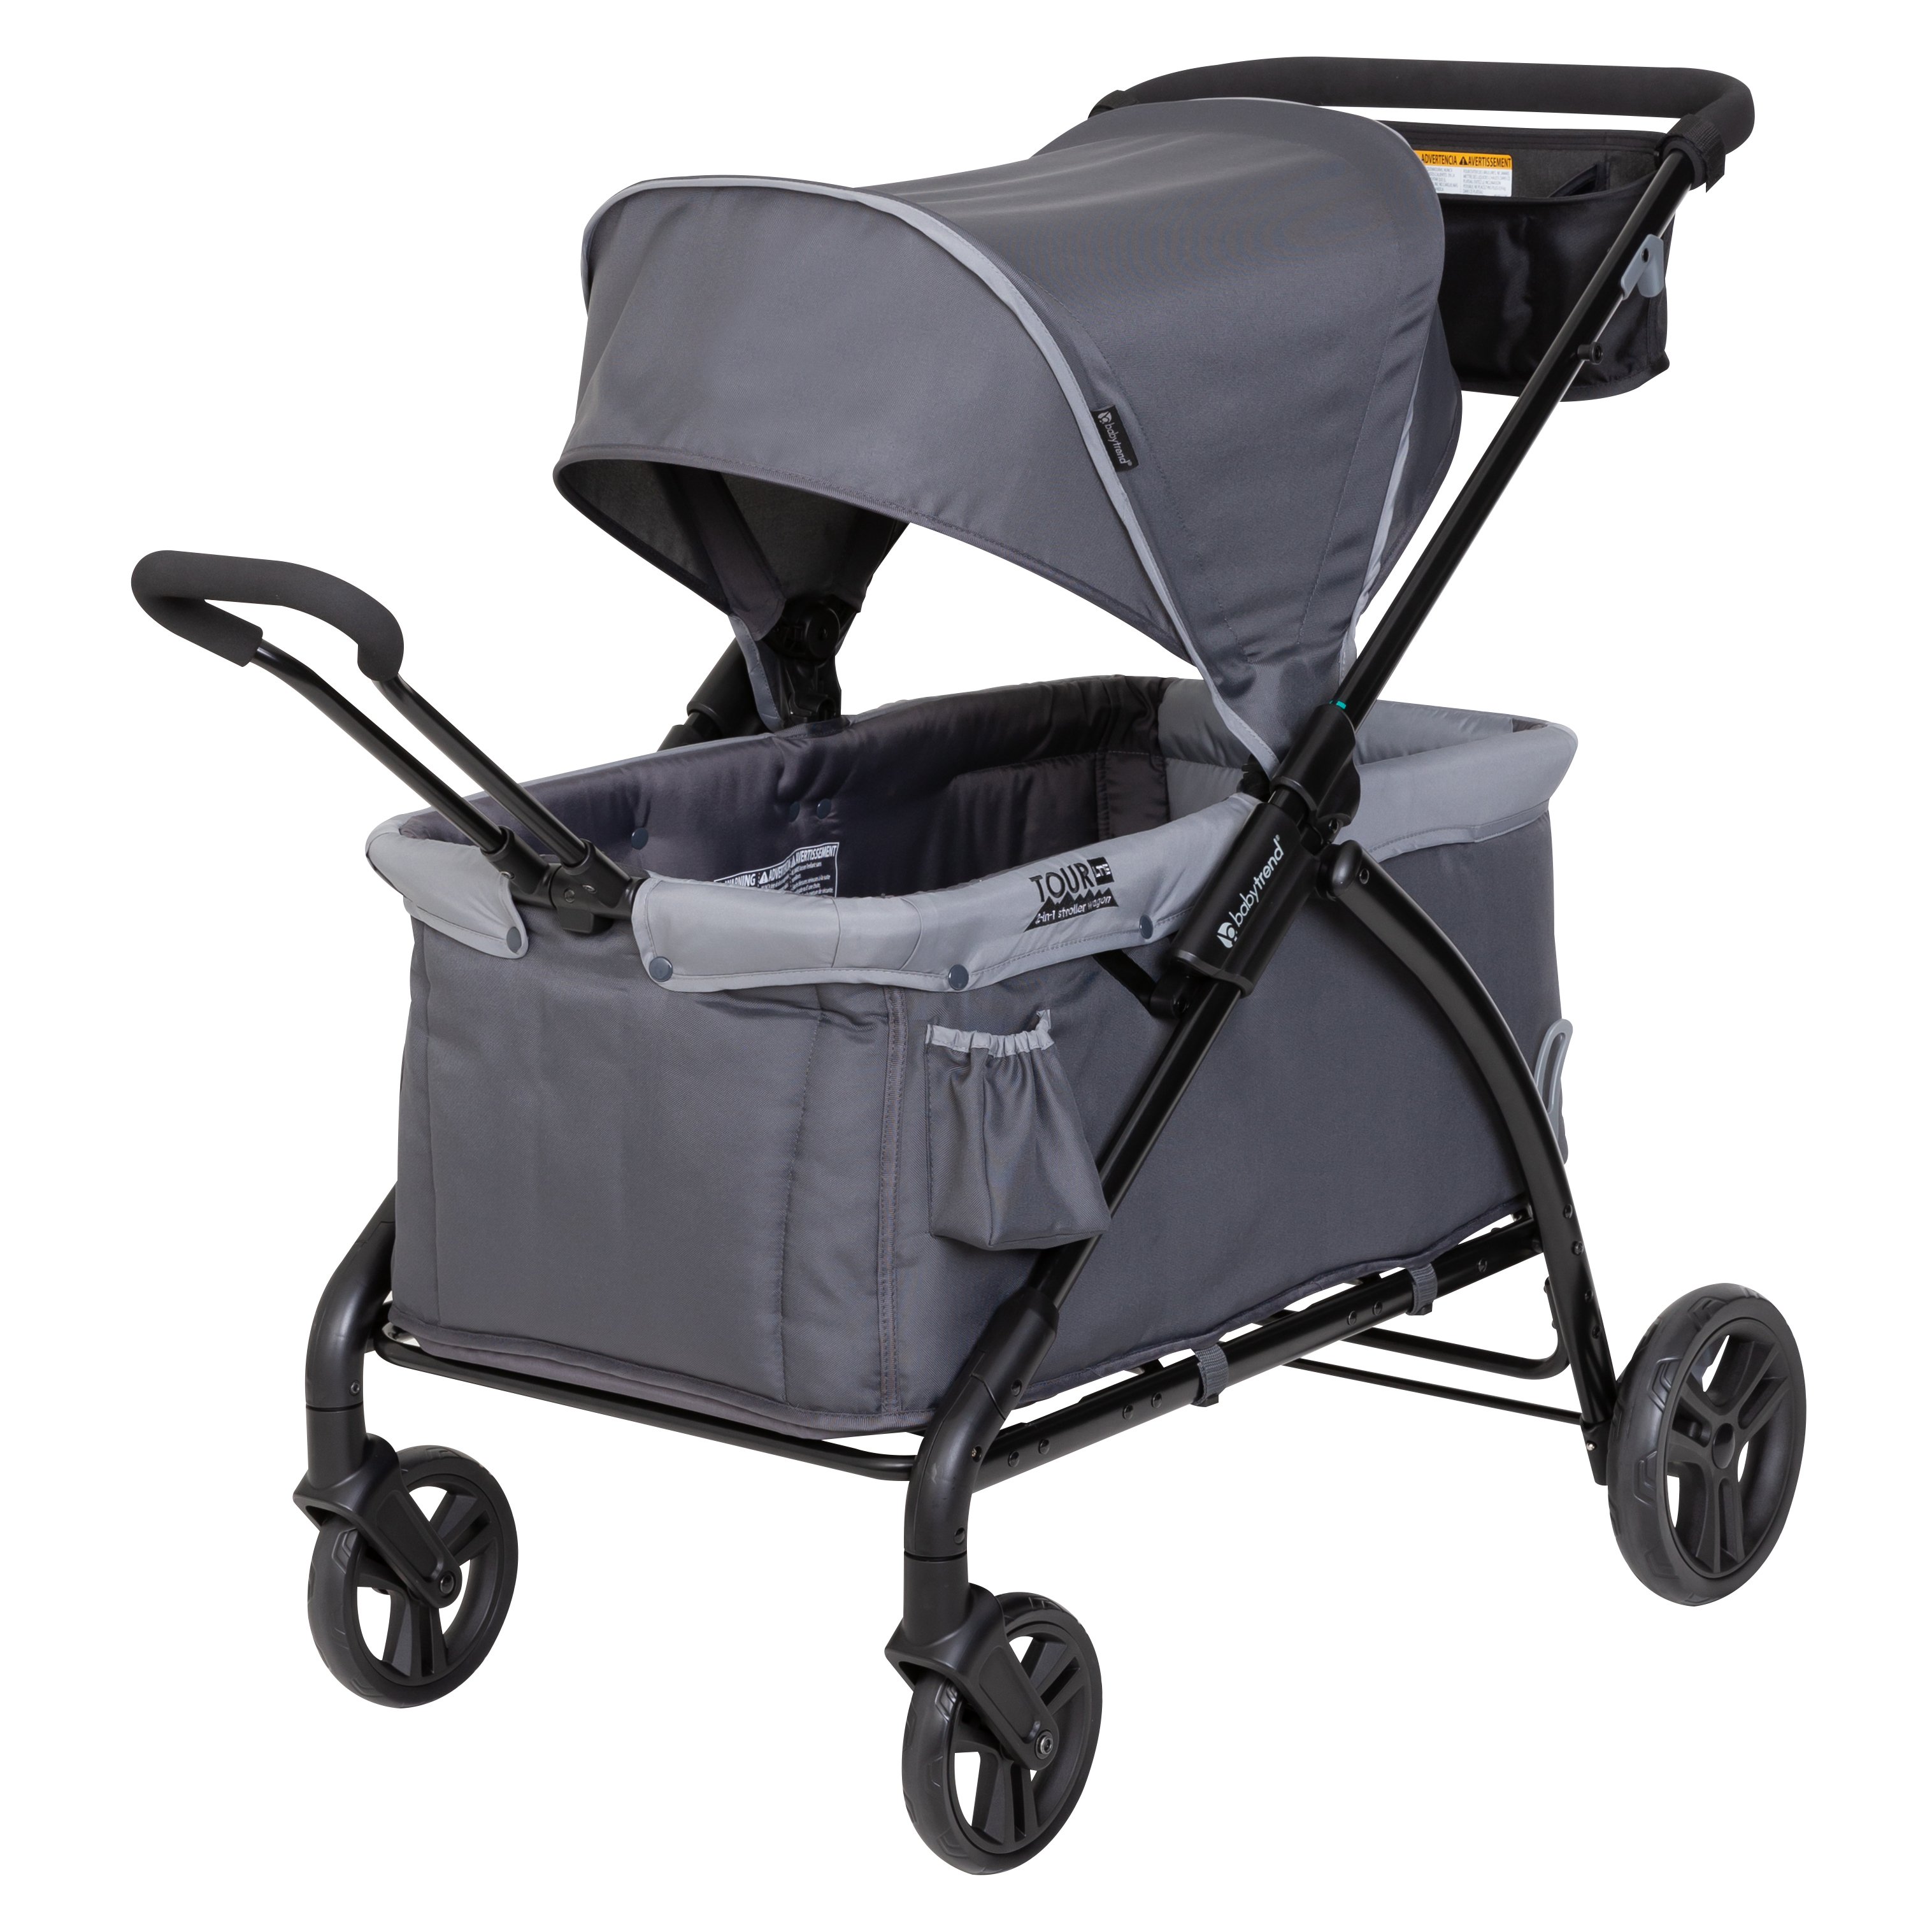 Baby Trend Tour LTE 2-in-1 Stroller Wagon - Desert Grey - image 4 of 13